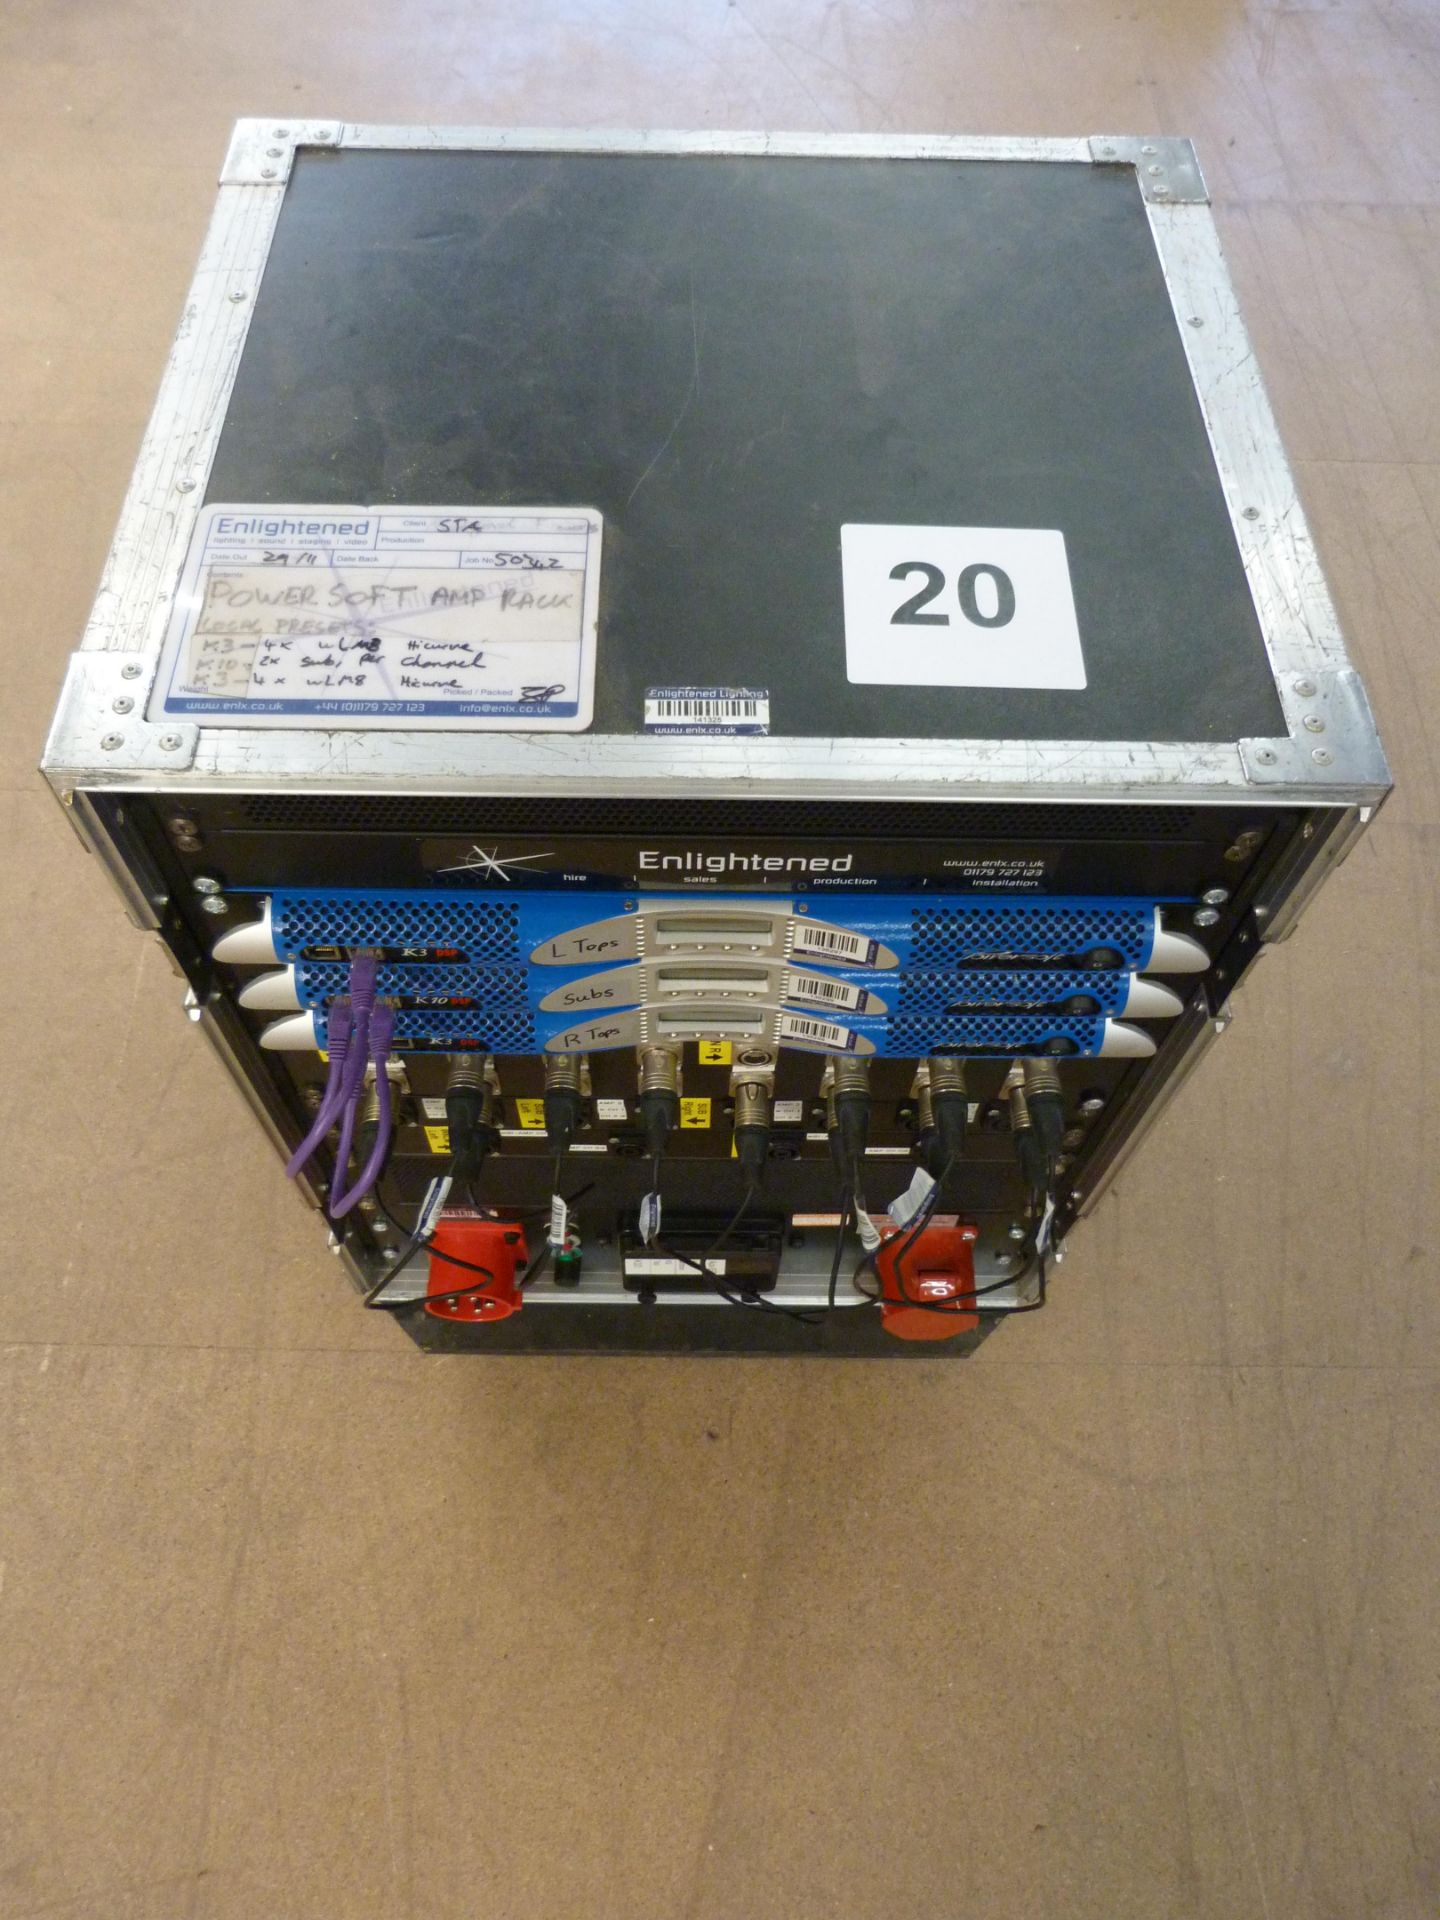 Powersoft Amp Rack. Included within Lot 10. If sum of Lots 11-20 is more than Lot 10, will be sold - Image 2 of 17